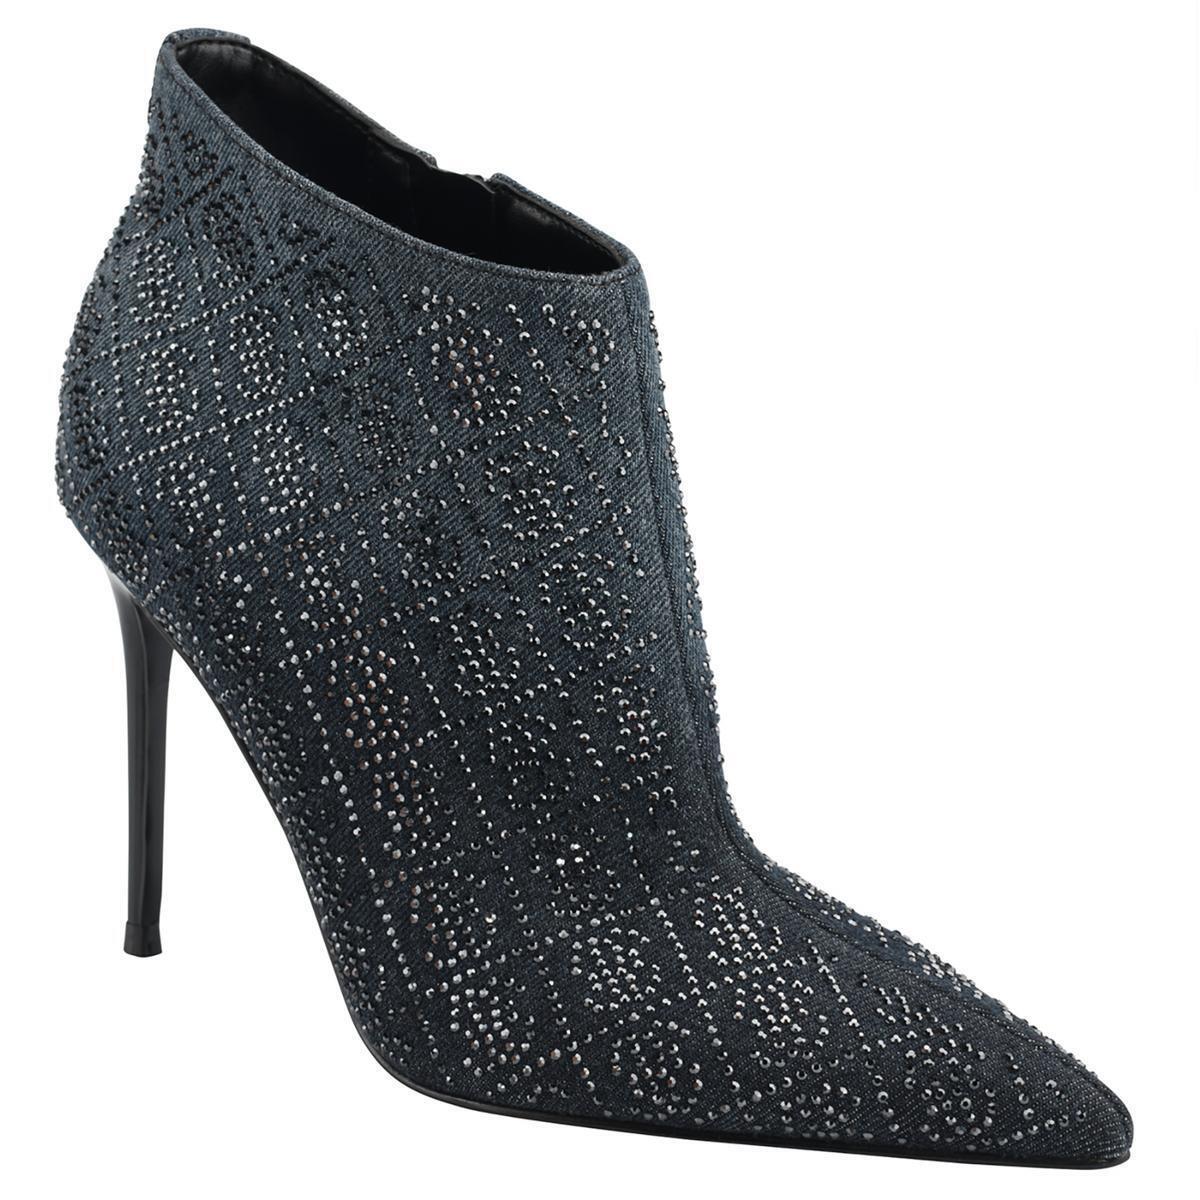 Guess Womens Fazzie Rhinestone Dressy Pointed Toe Booties Shoes Bhfo 4925